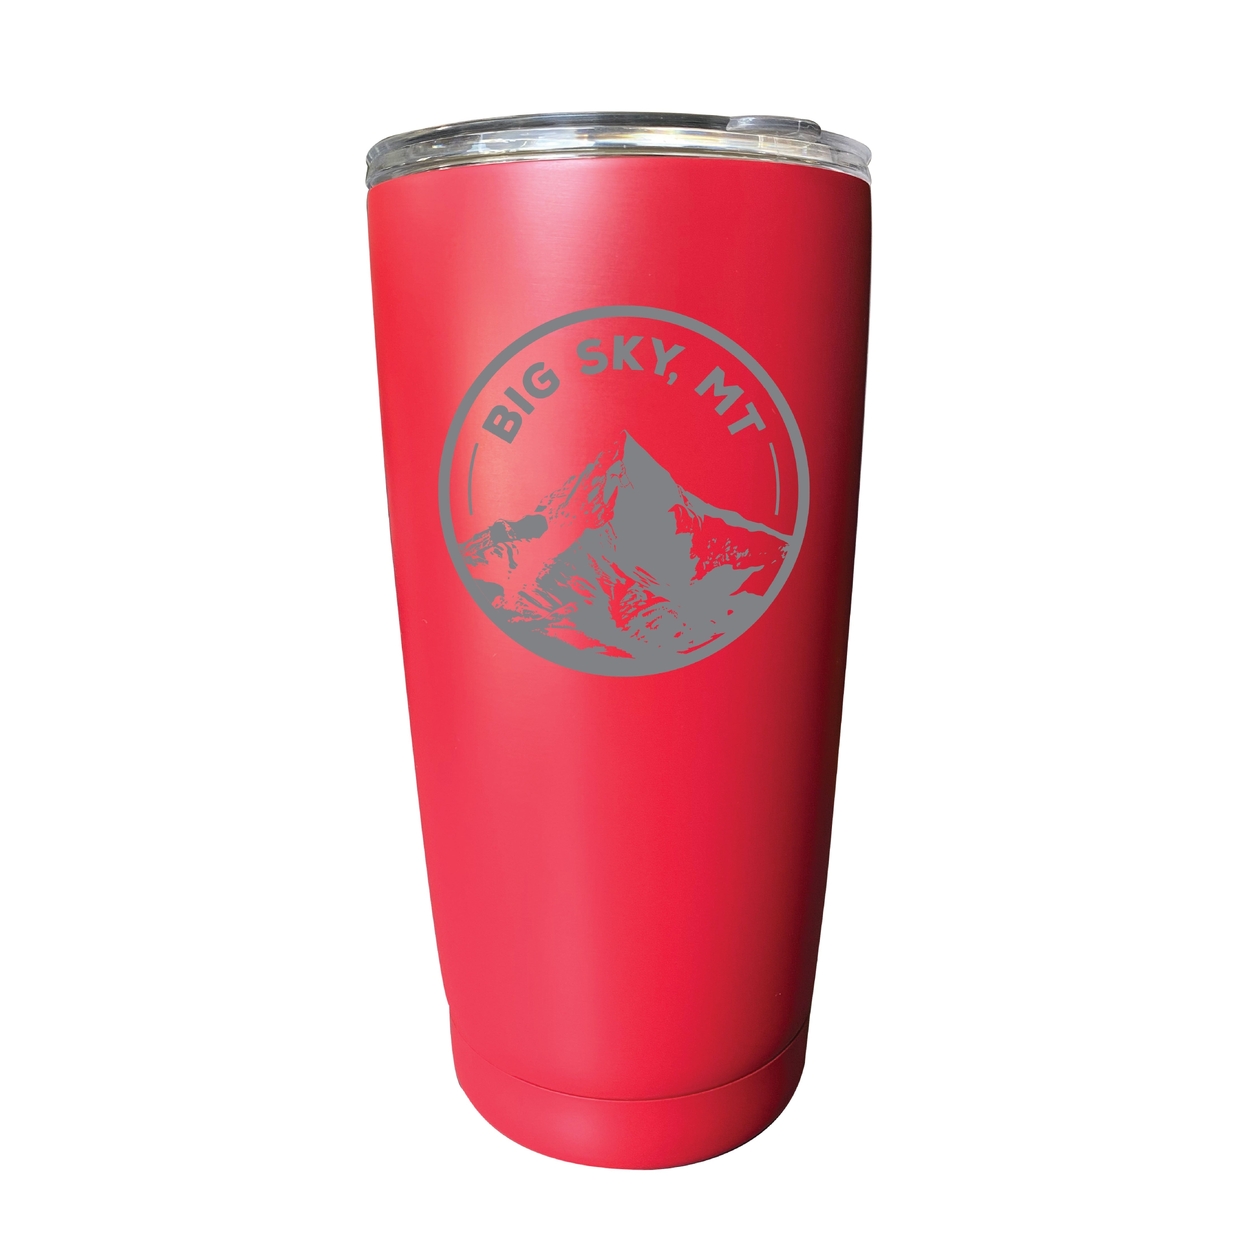 Big Sky Montana Souvenir 16 Oz Engraved Stainless Steel Insulated Tumbler - Red,,Single Unit